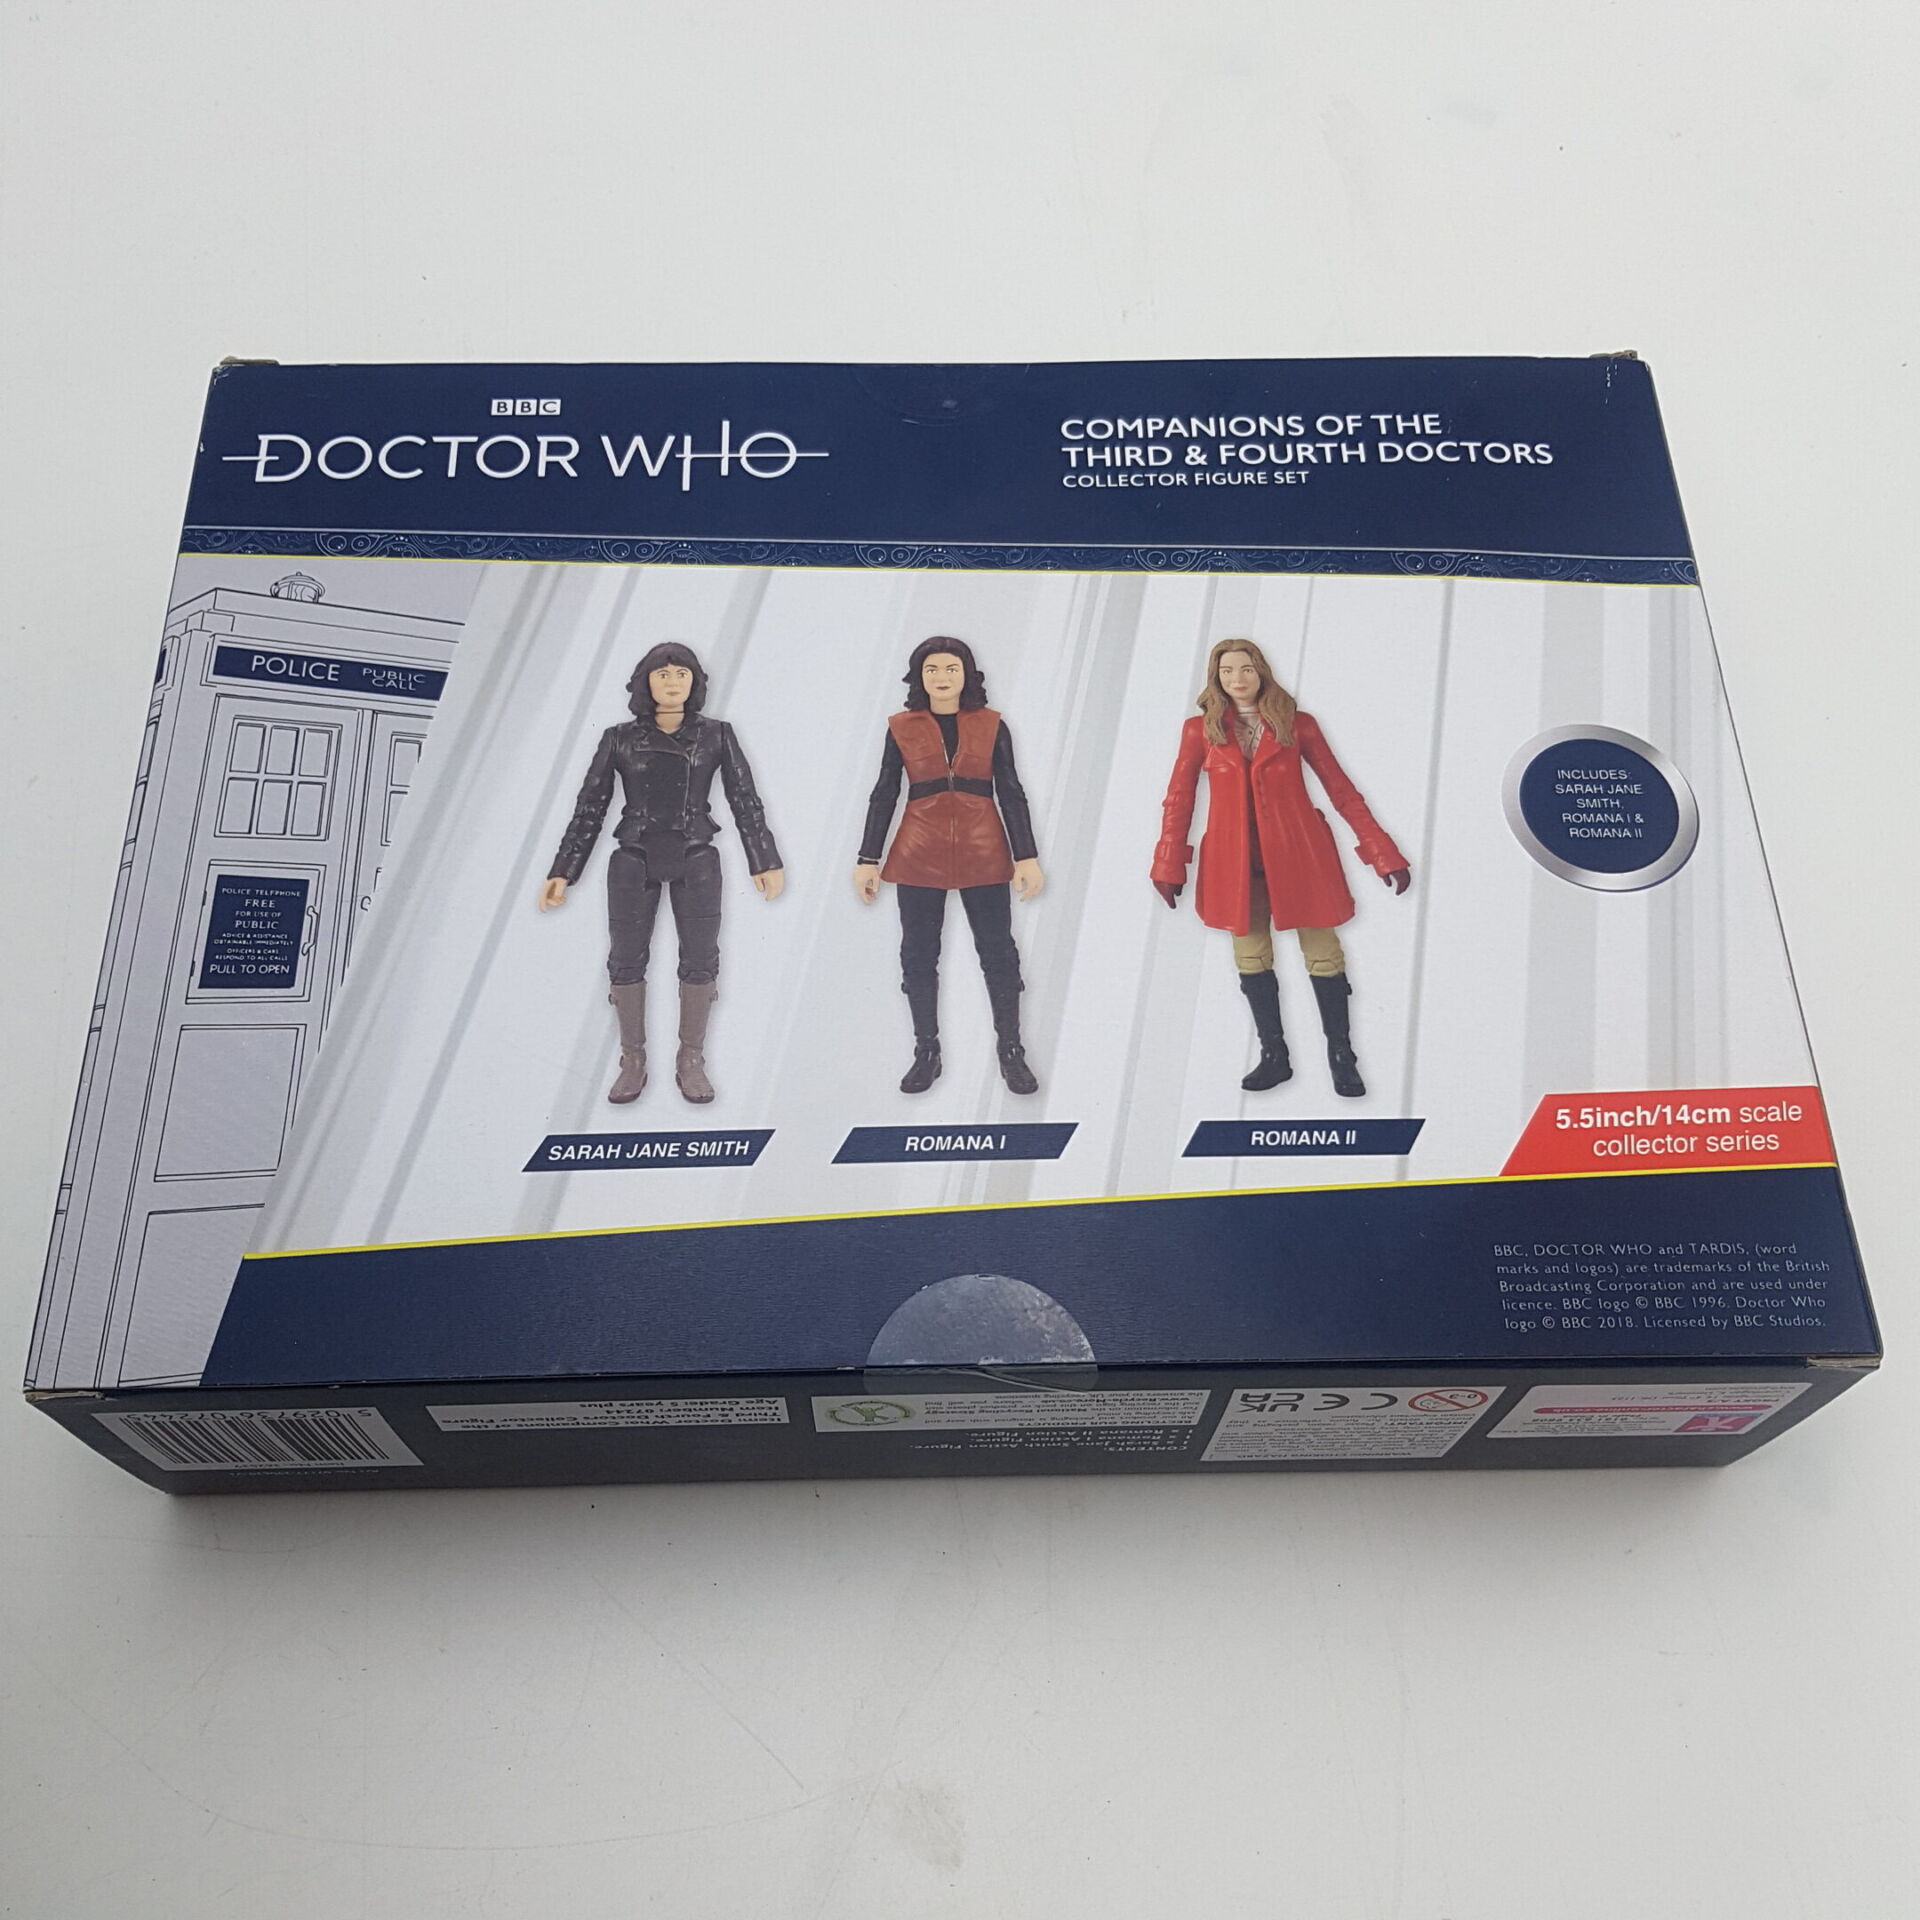 Doctor Who Companions of the Third and Fourth Doctors Collector Figure Set for sale online 